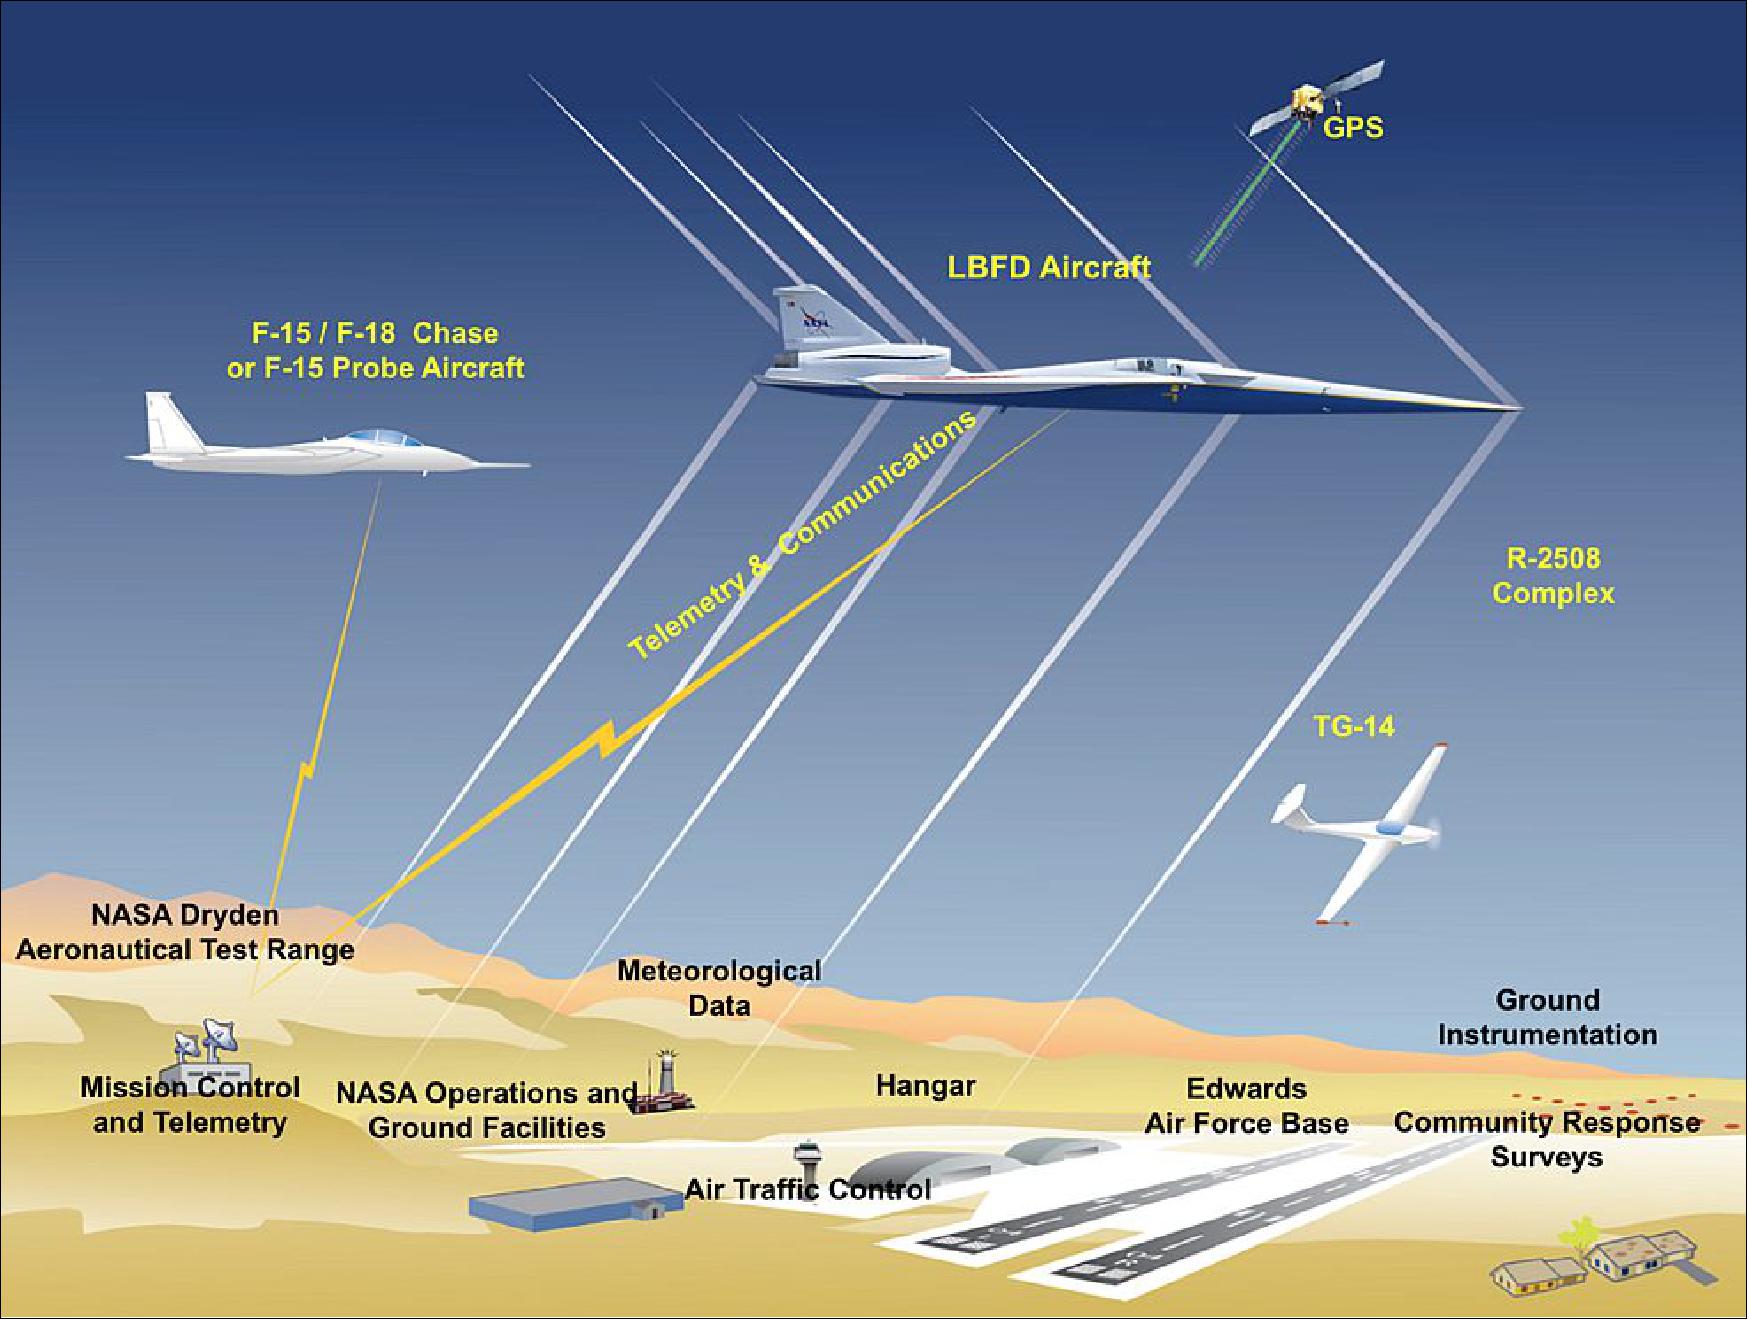 Figure 1: This graphic shows the Concept of Operations, or 'ConOps', for the Low-Boom Flight Demonstration mission. The mission has three phases. Phases 1 and 2 will be conducted within the R-2508 Complex at Edwards Air Force Base in California, using the facilities and support aircraft depicted here and including overflights of the base community. For Phase 3, the demonstrator will be deployed to communities in other parts of the country to conduct low -boom community response overflight studies (image credit: NASA)